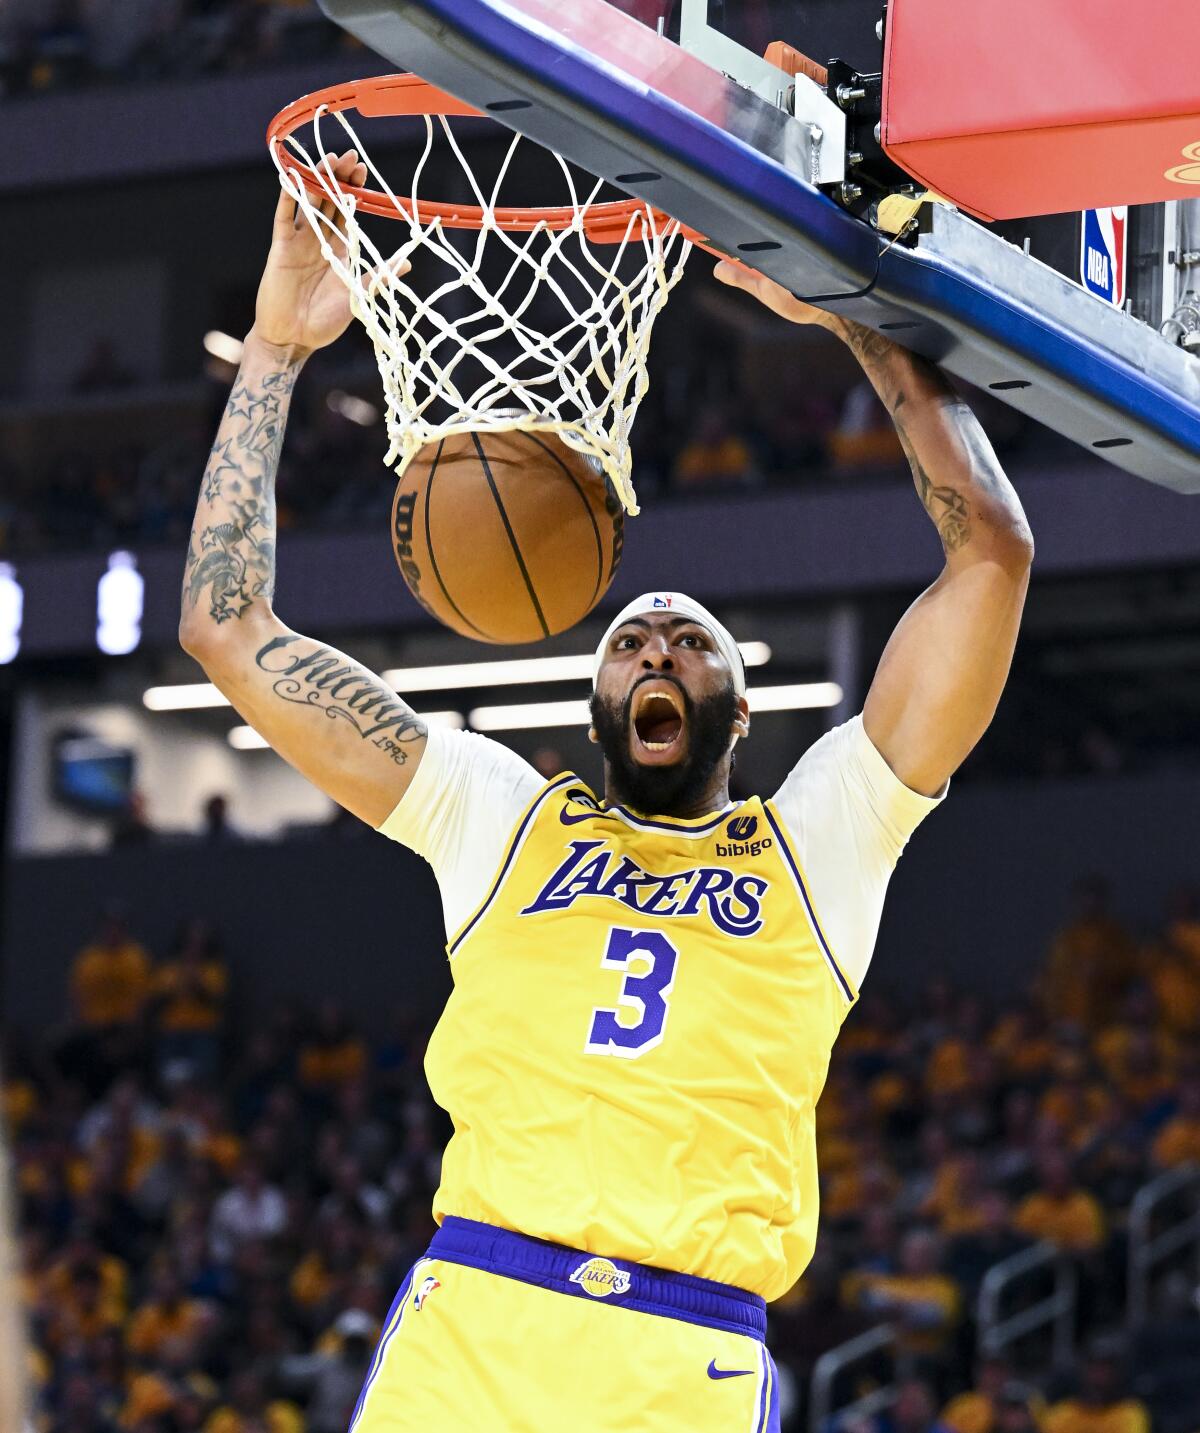 Lakers forward Anthony Davis yells as he dunks during the first quarter of Game 5.